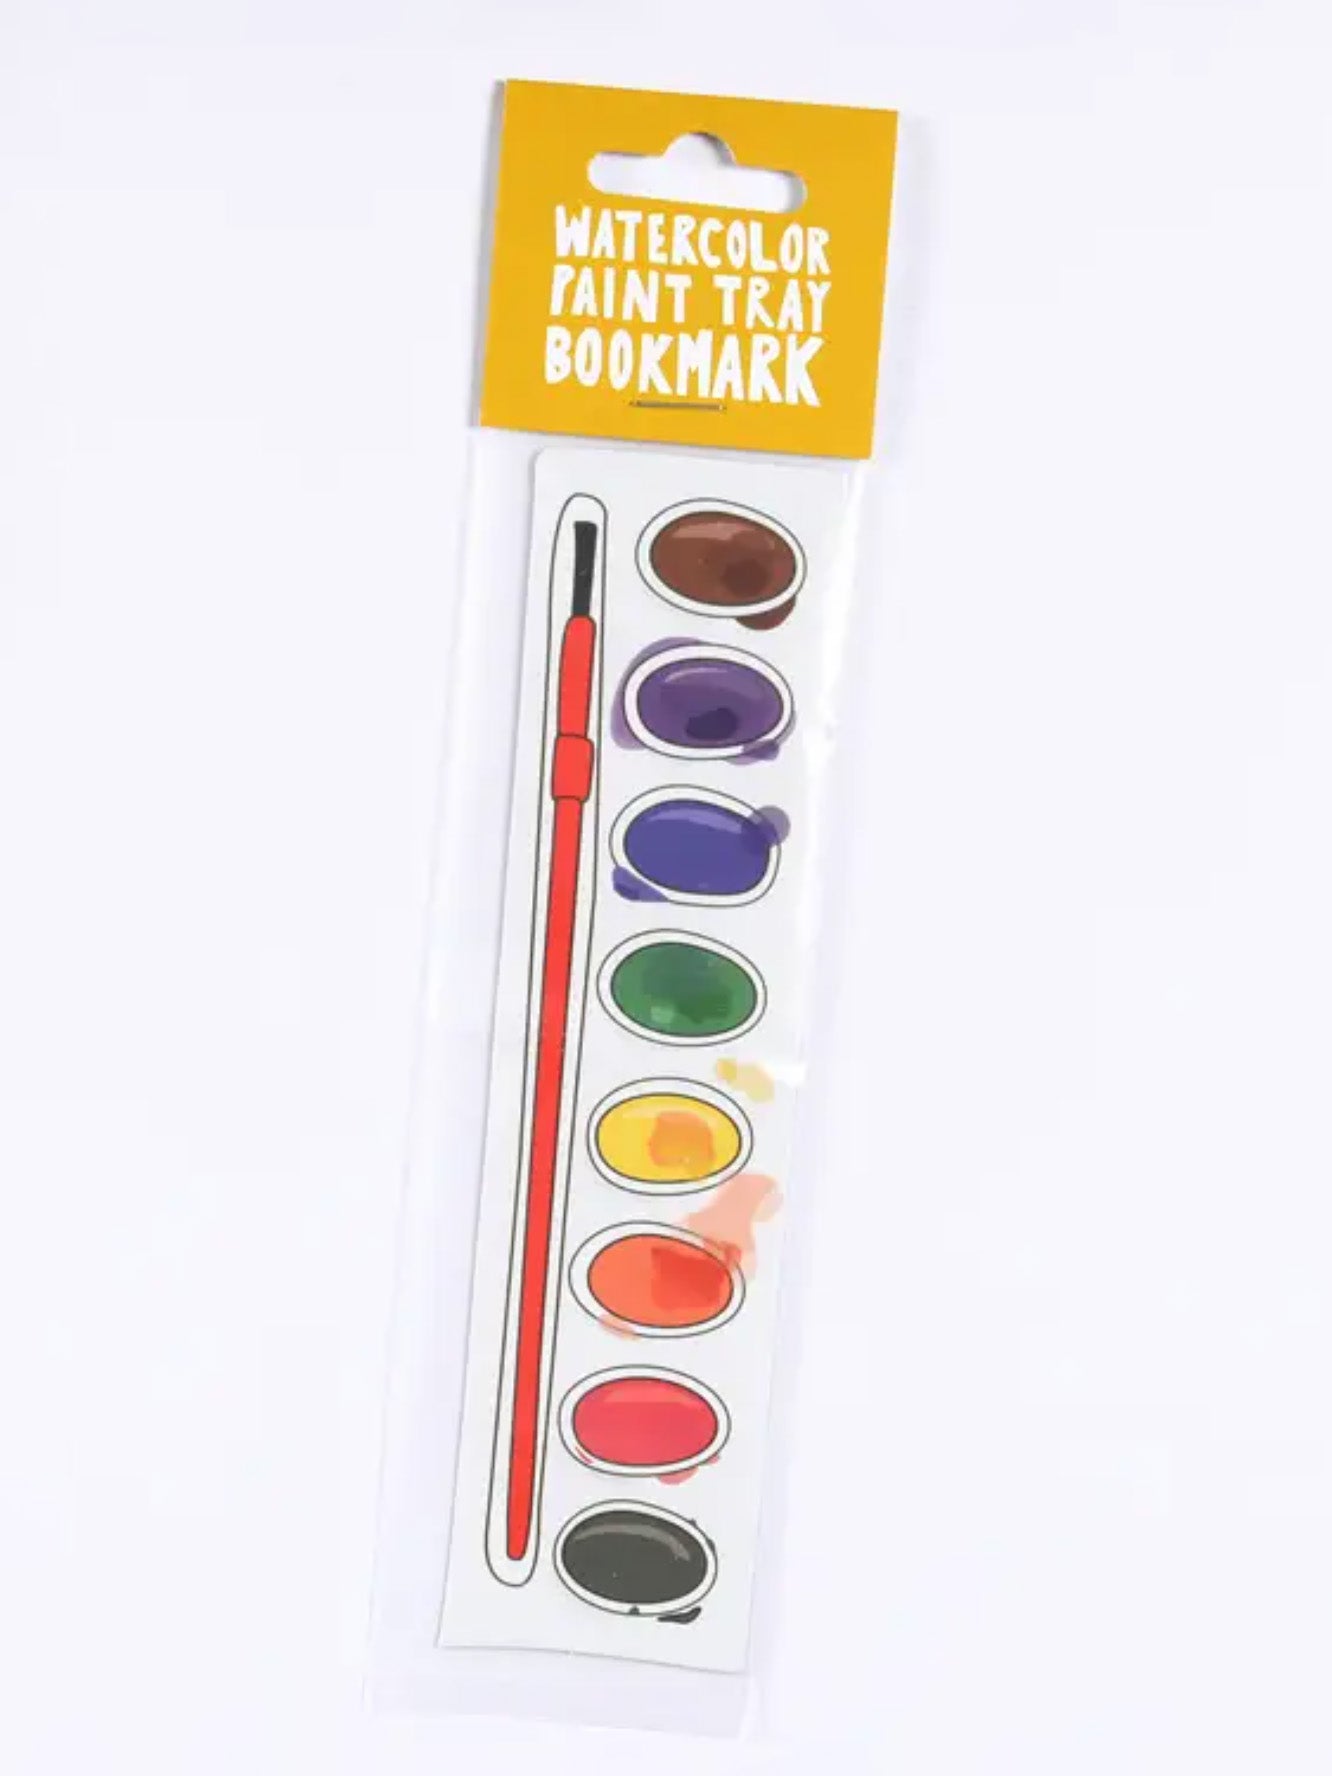 watercolor paint tray bookmark